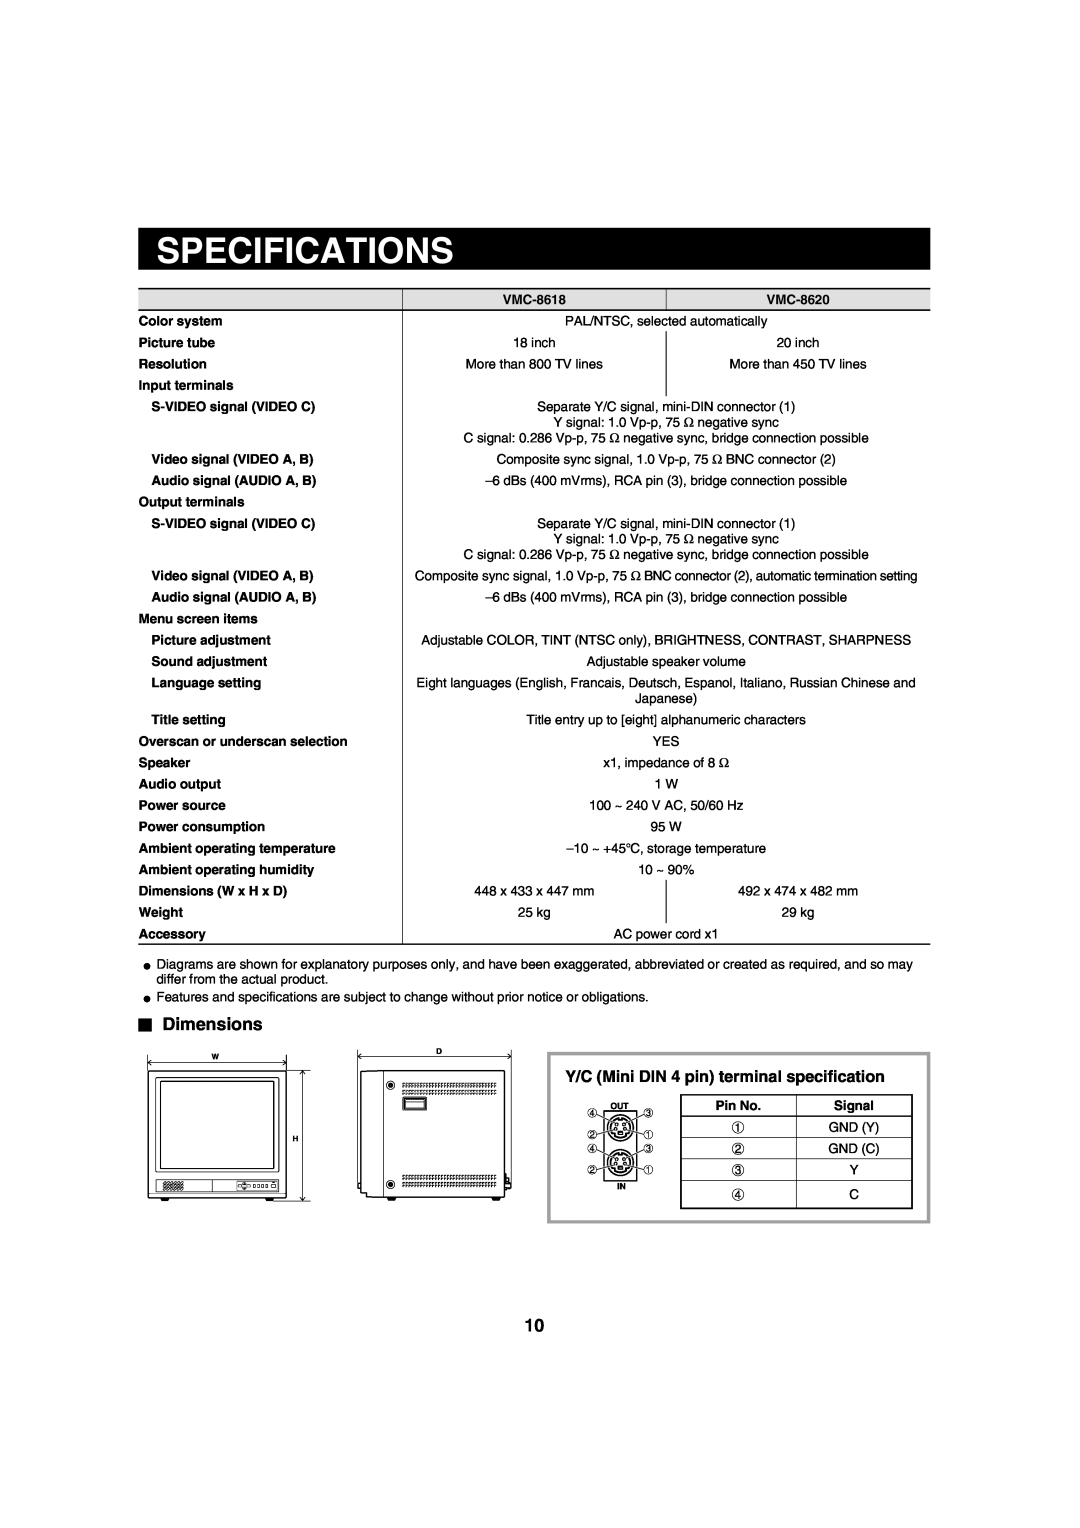 Sanyo VMC-8620 instruction manual Specifications, Dimensions, Y/C Mini DIN 4 pin terminal specification 